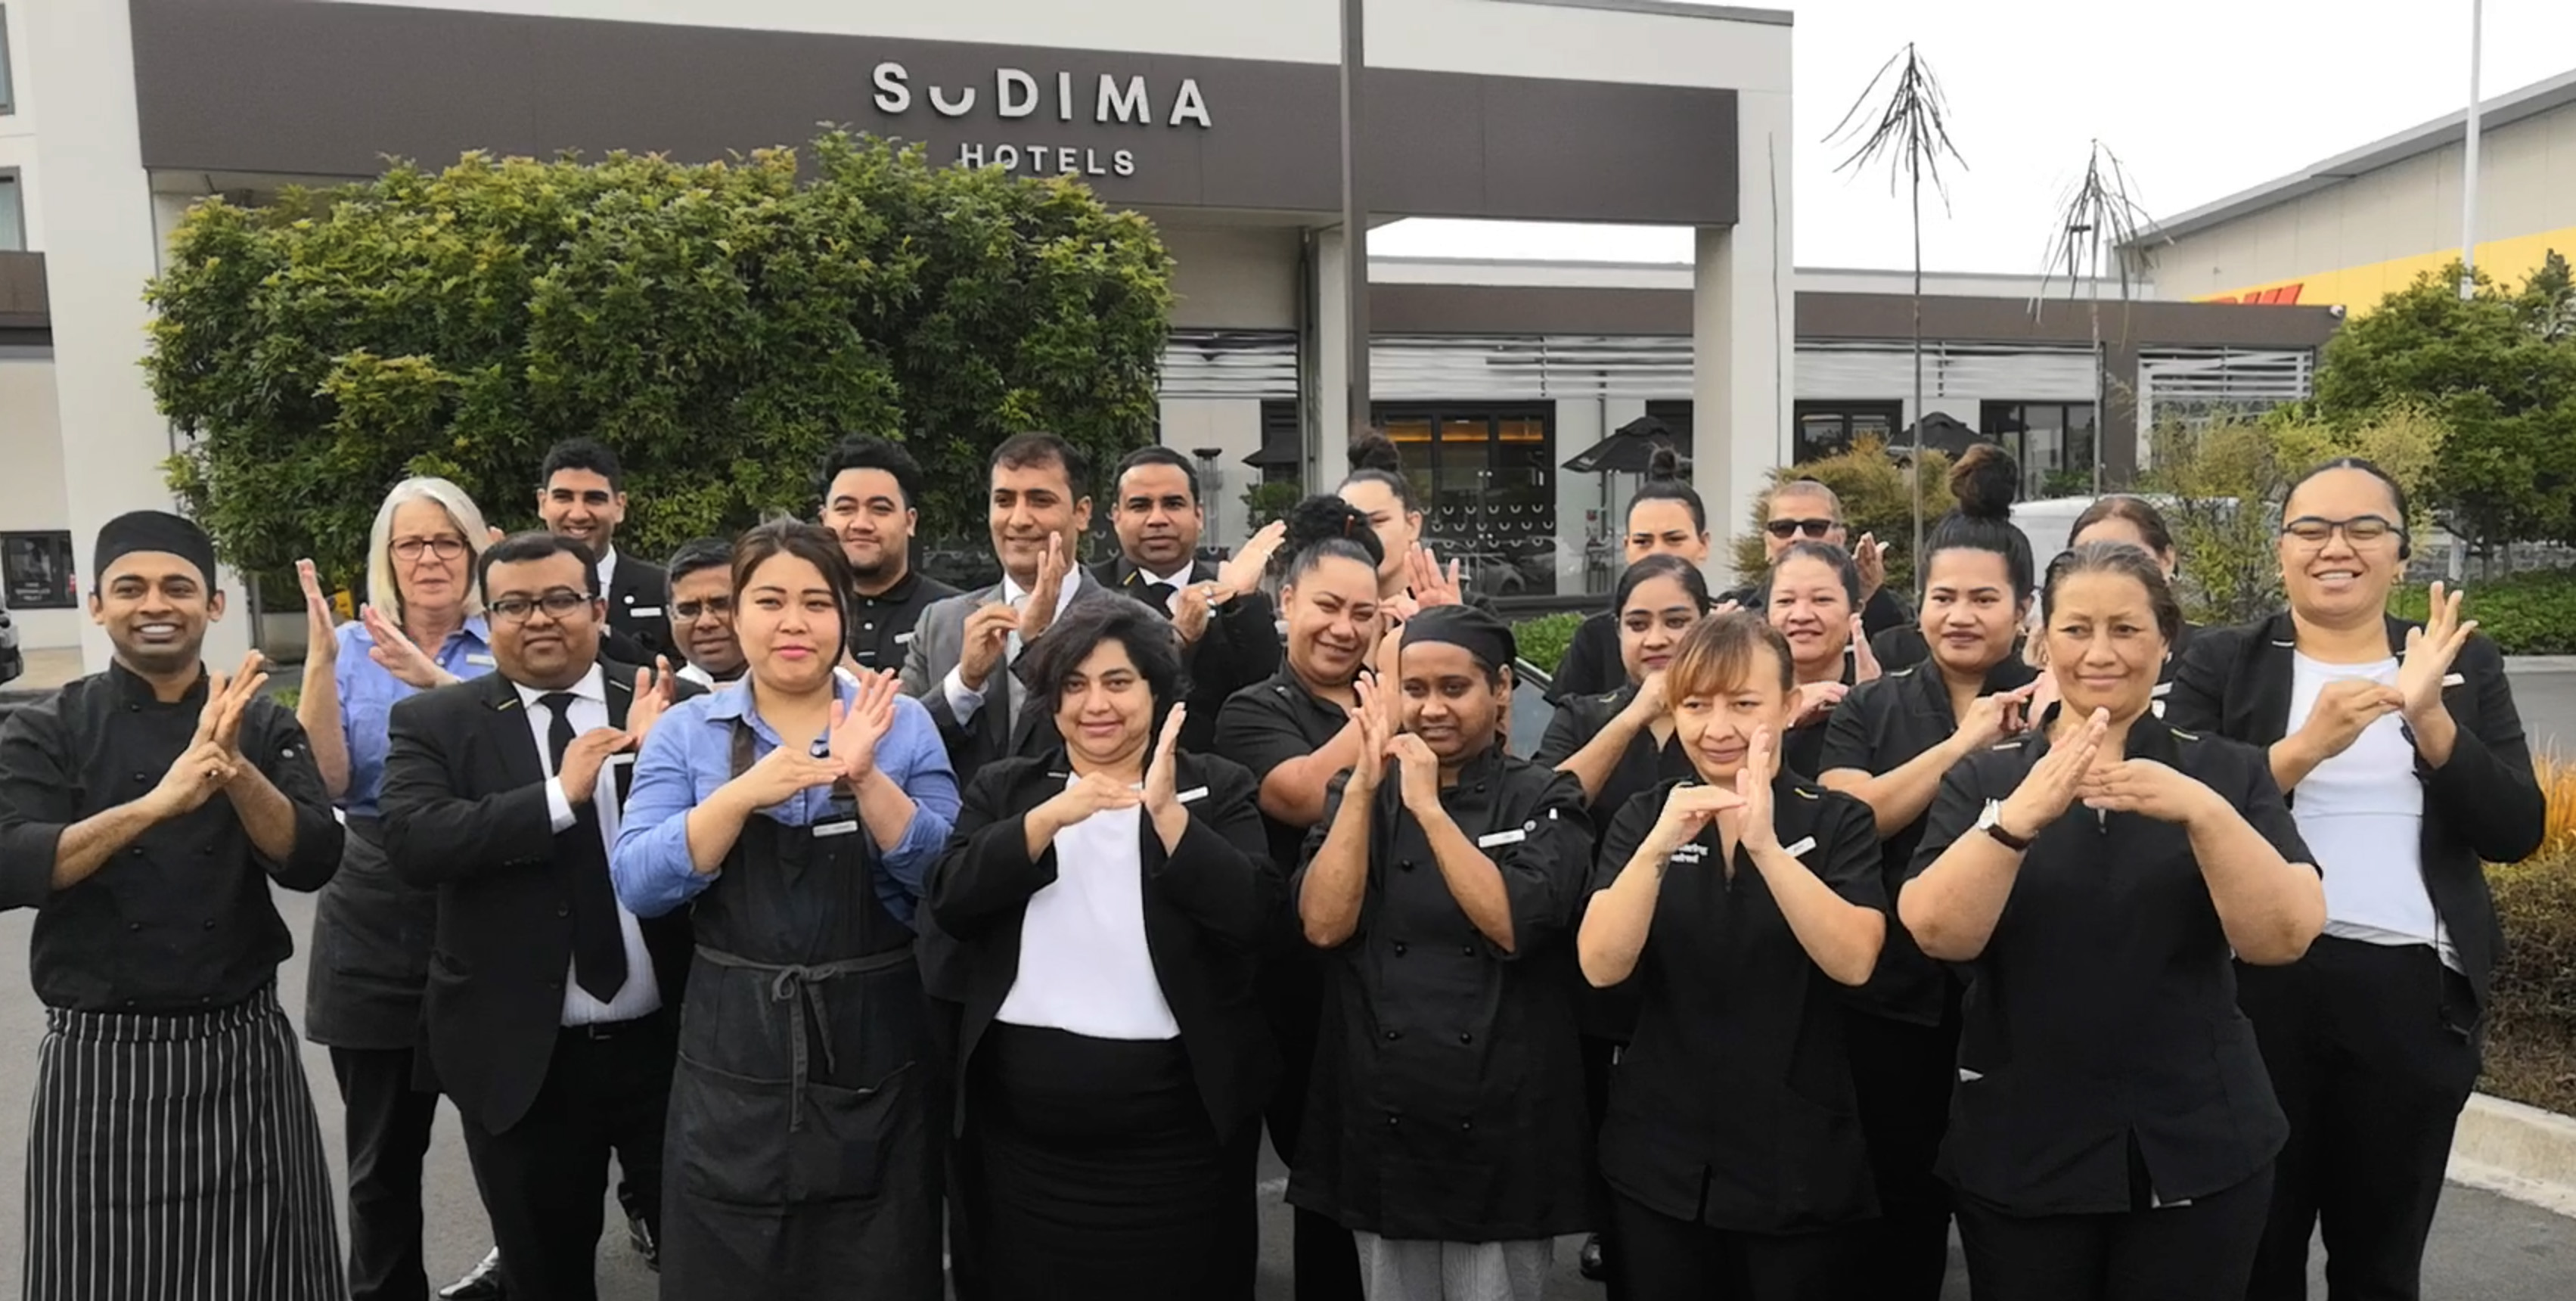 Team at Auckland Airport Hotel doing a welcome in sign language